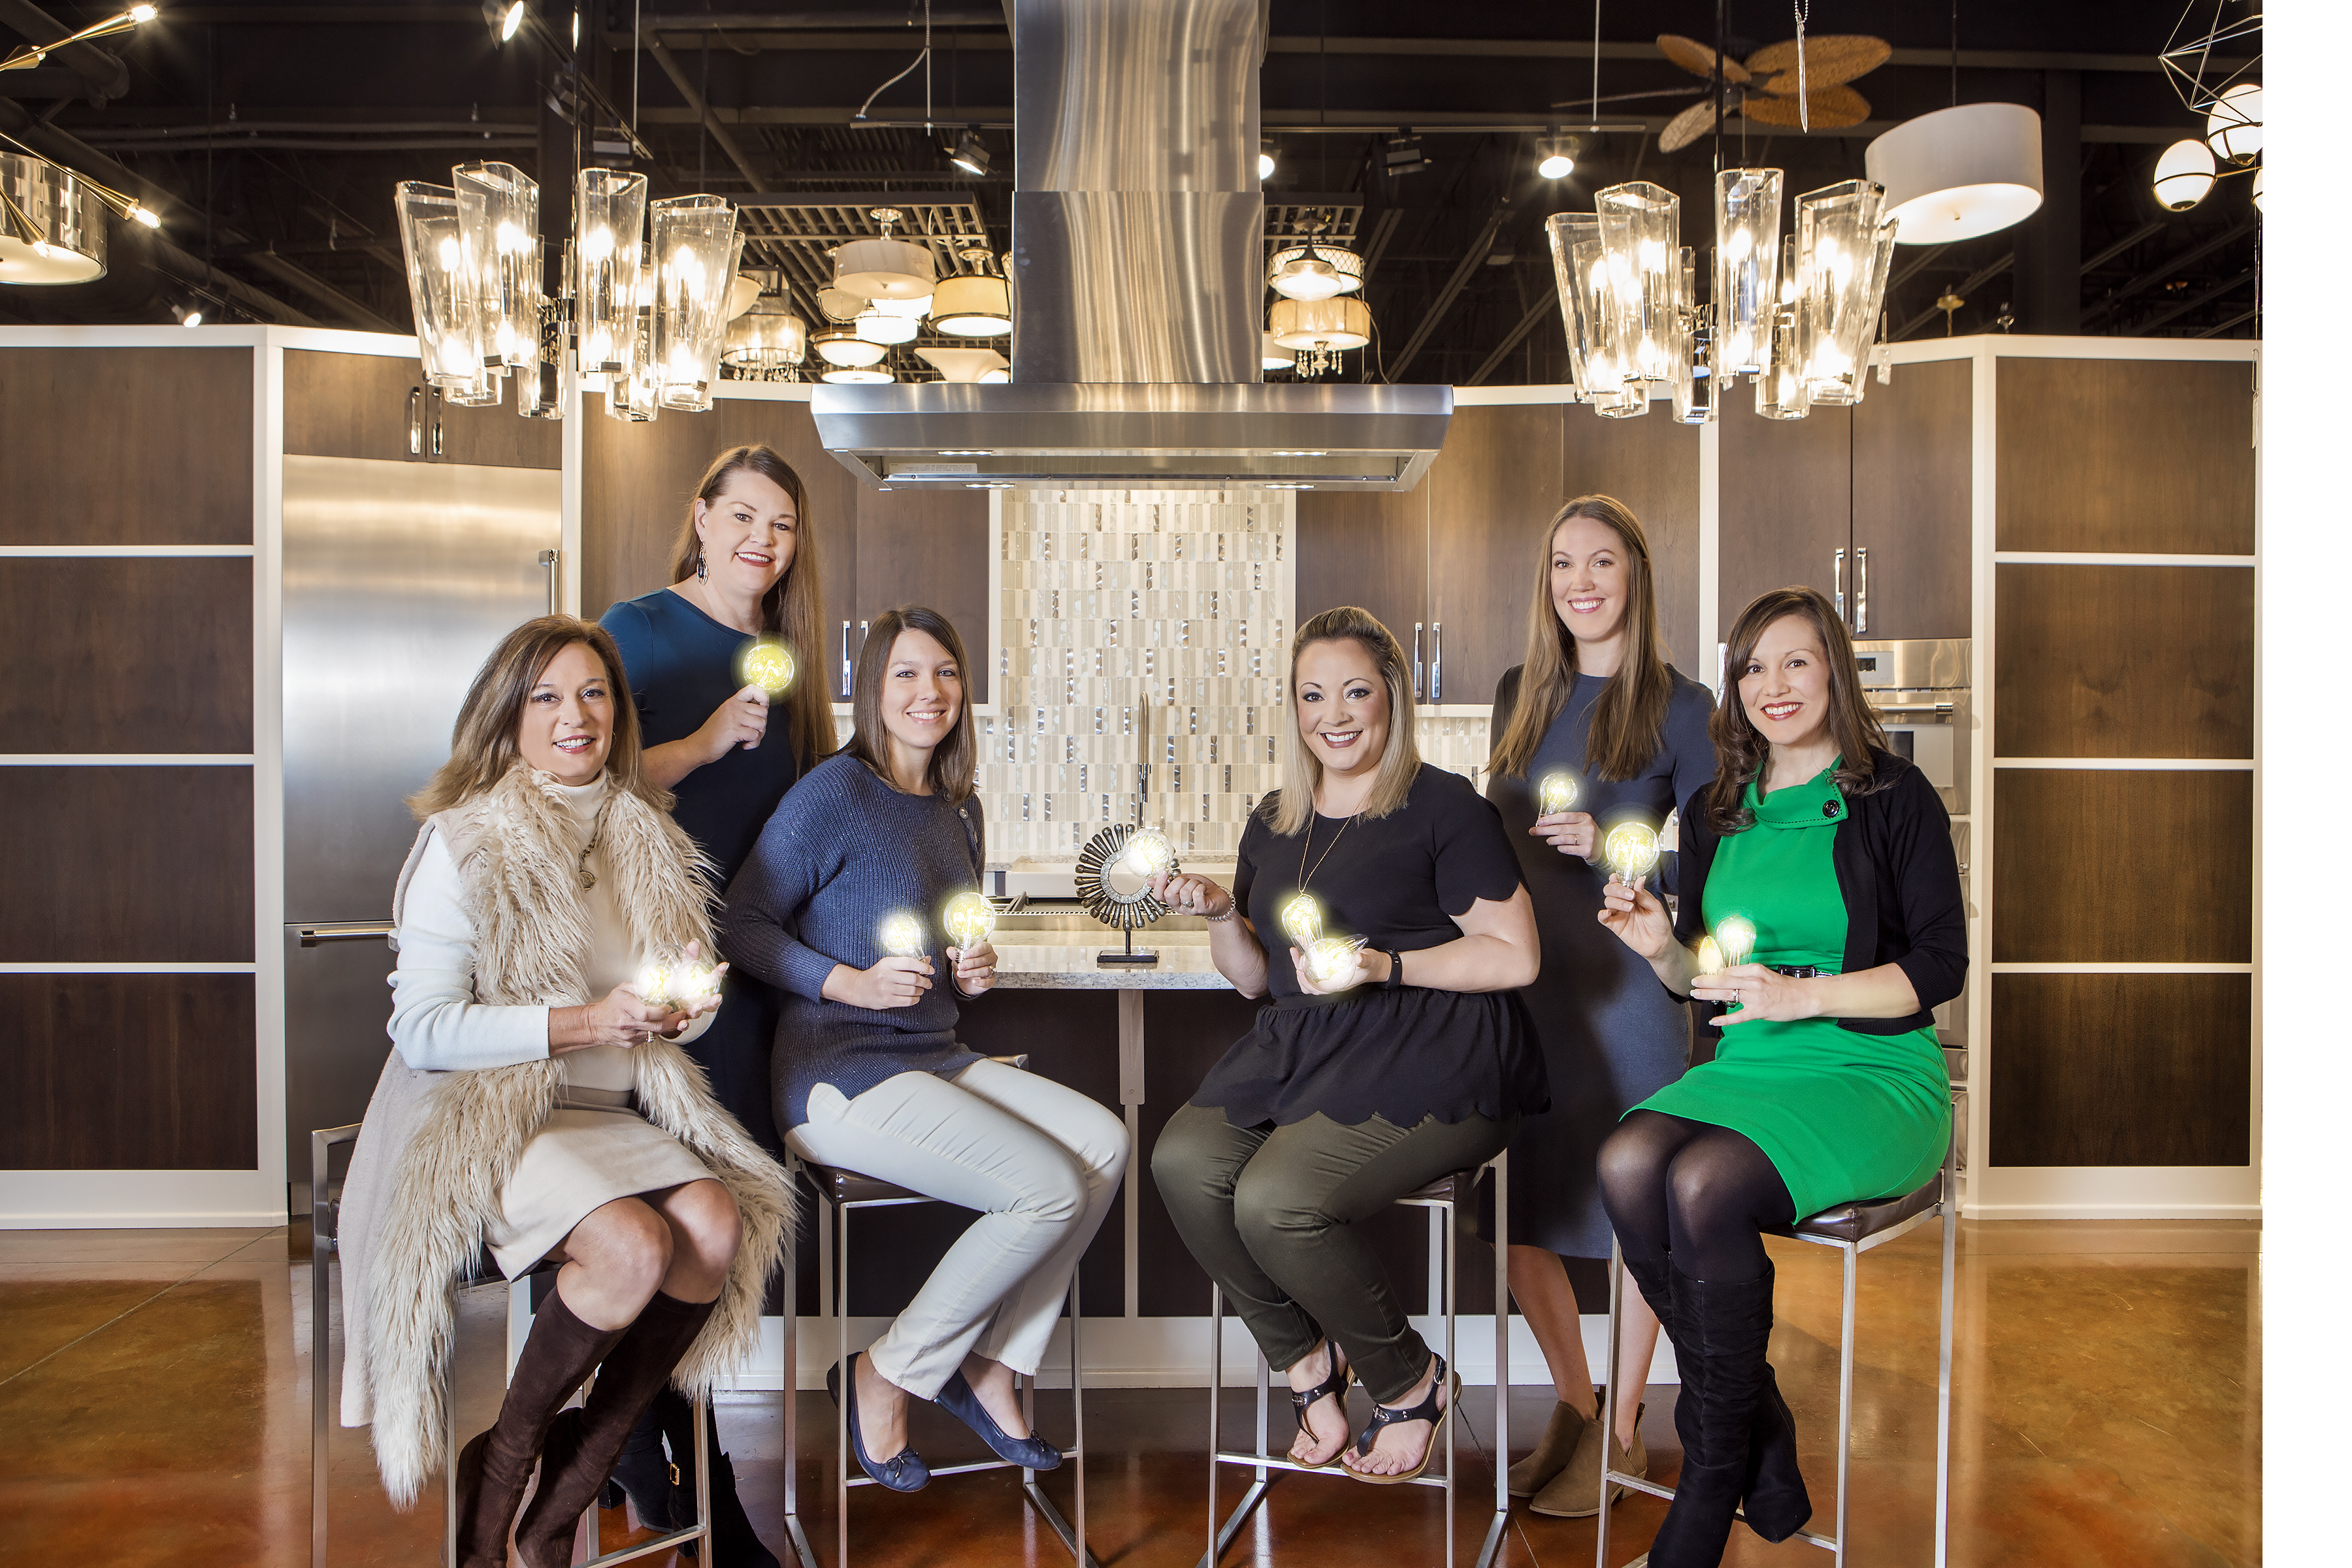 The ladies at Ferguson Bath, Kitchen & Lighting Gallery light up the front of a stunning Thermador kitchen vignette celebrating their big win of Best Lighting Store. Cathi Lunceford, Mallory Wooten, Sarah Stephens, Halley Eargle, Hannah Cooke, and Cassie West, showroom manager.